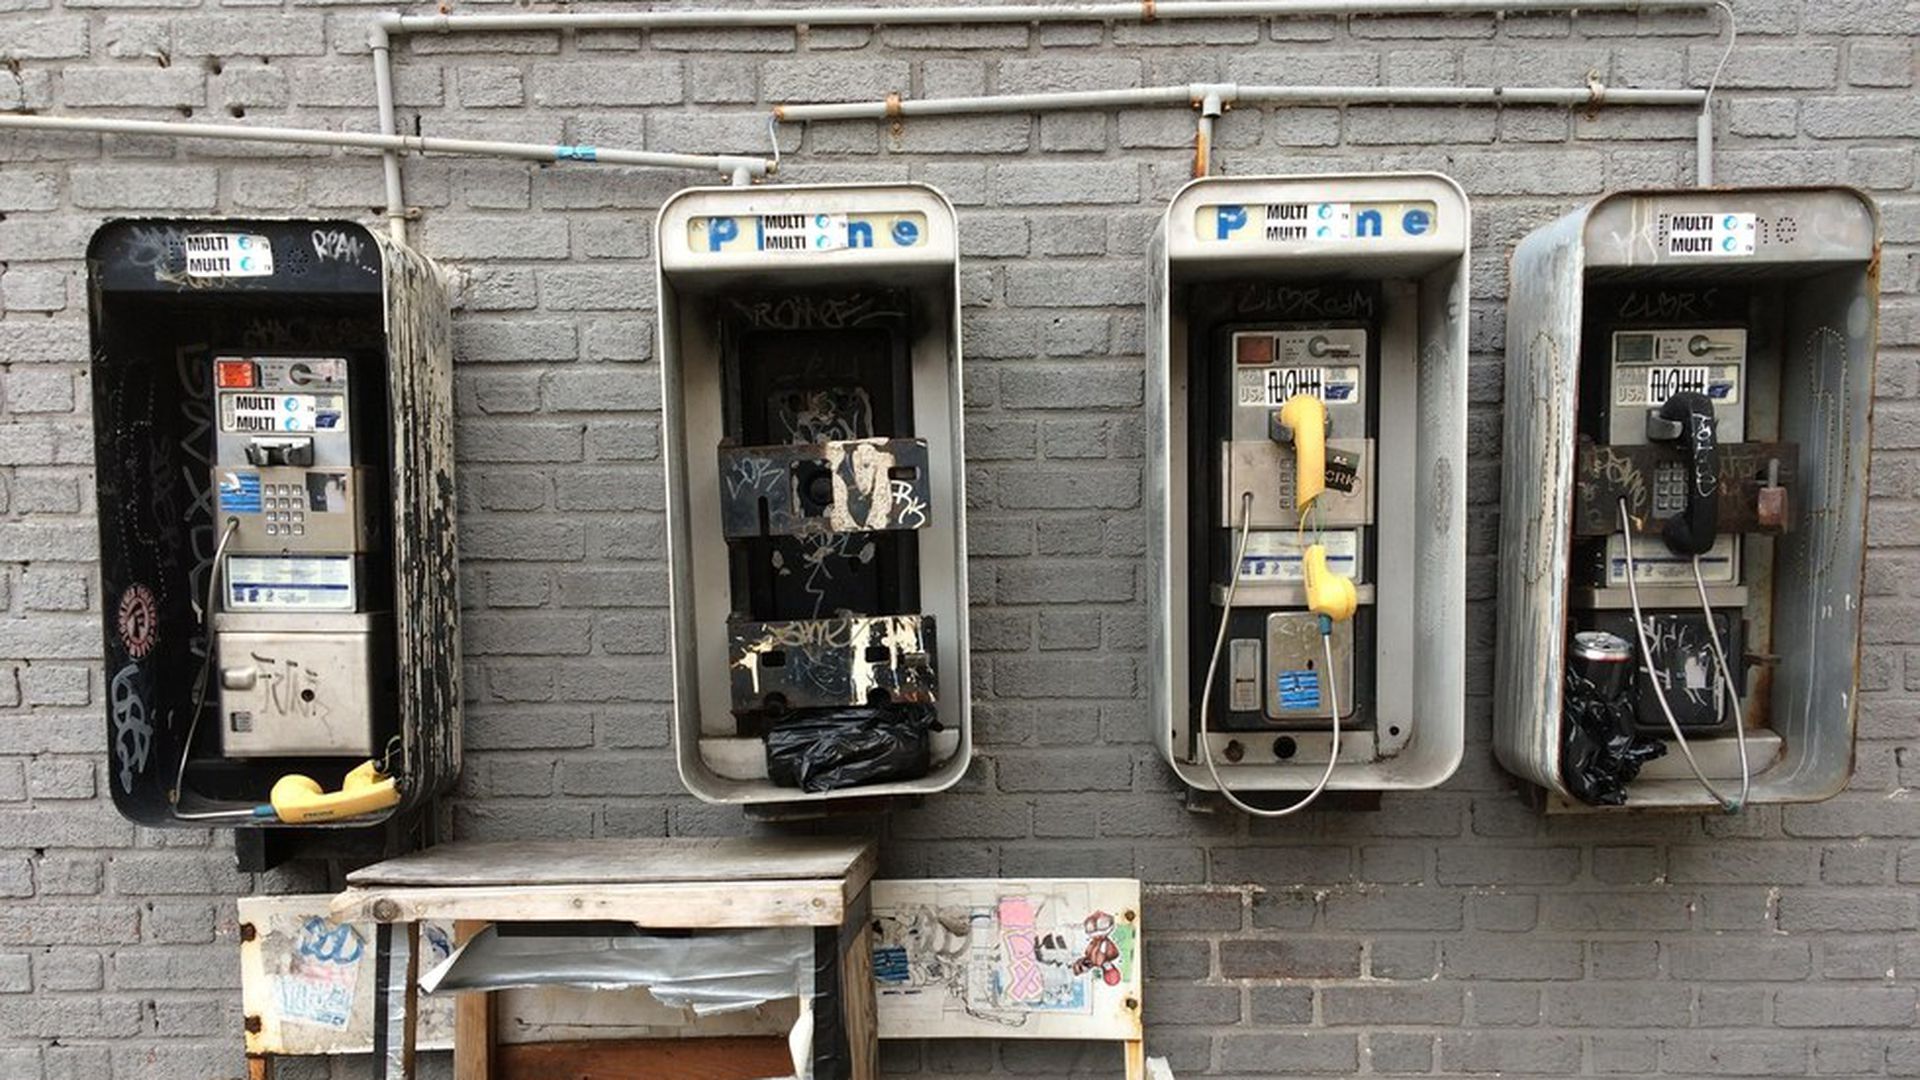 Fcc No Longer Cares To Regulate Pay Phones Because There Are So